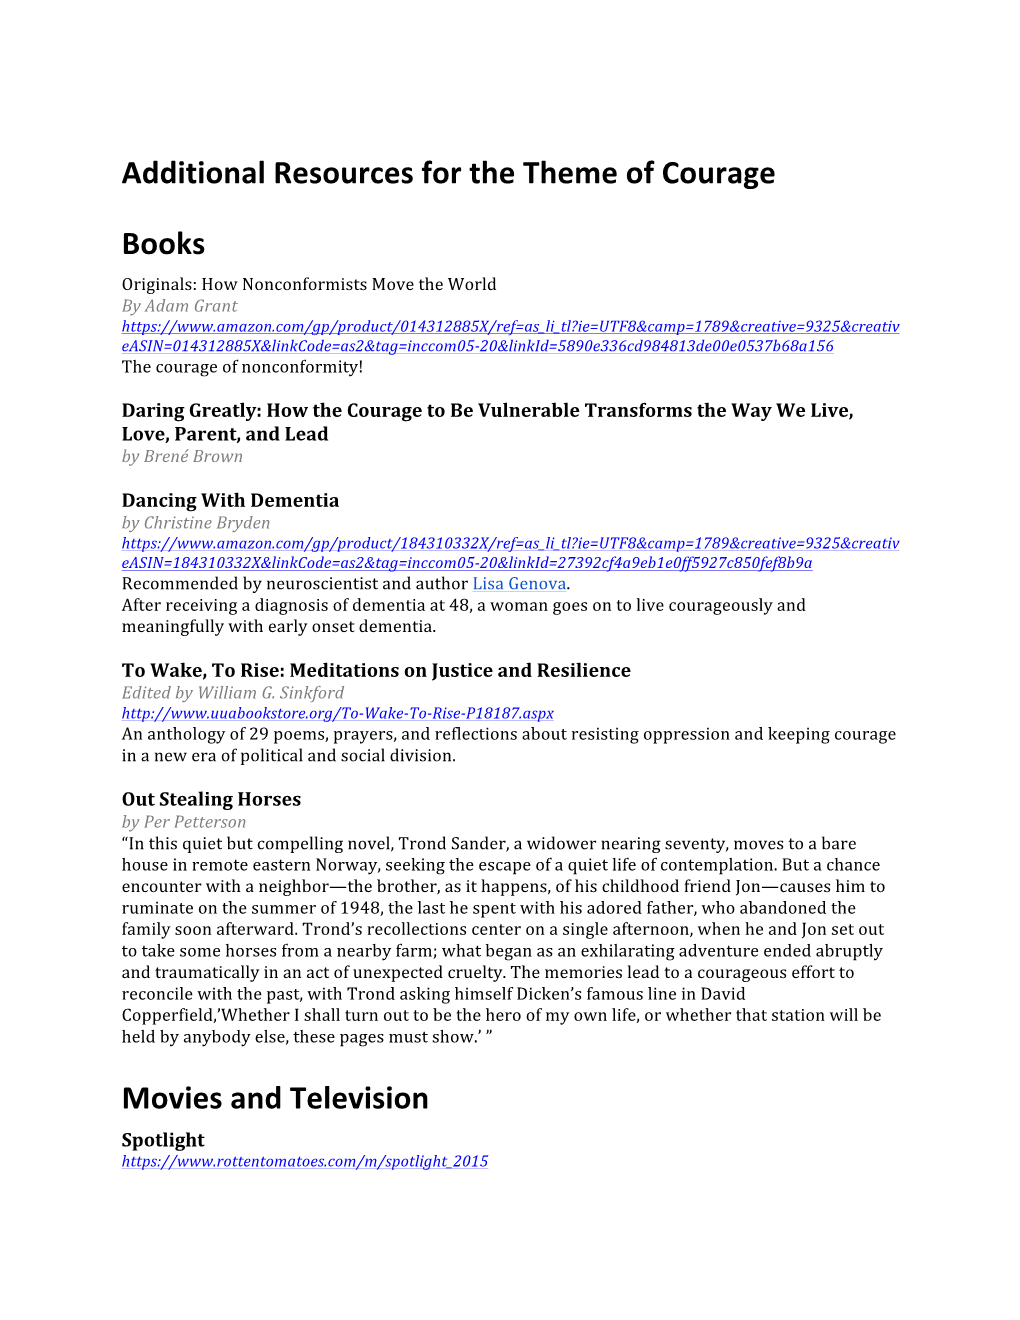 Additional Resources for the Theme of Courage Books Movies And